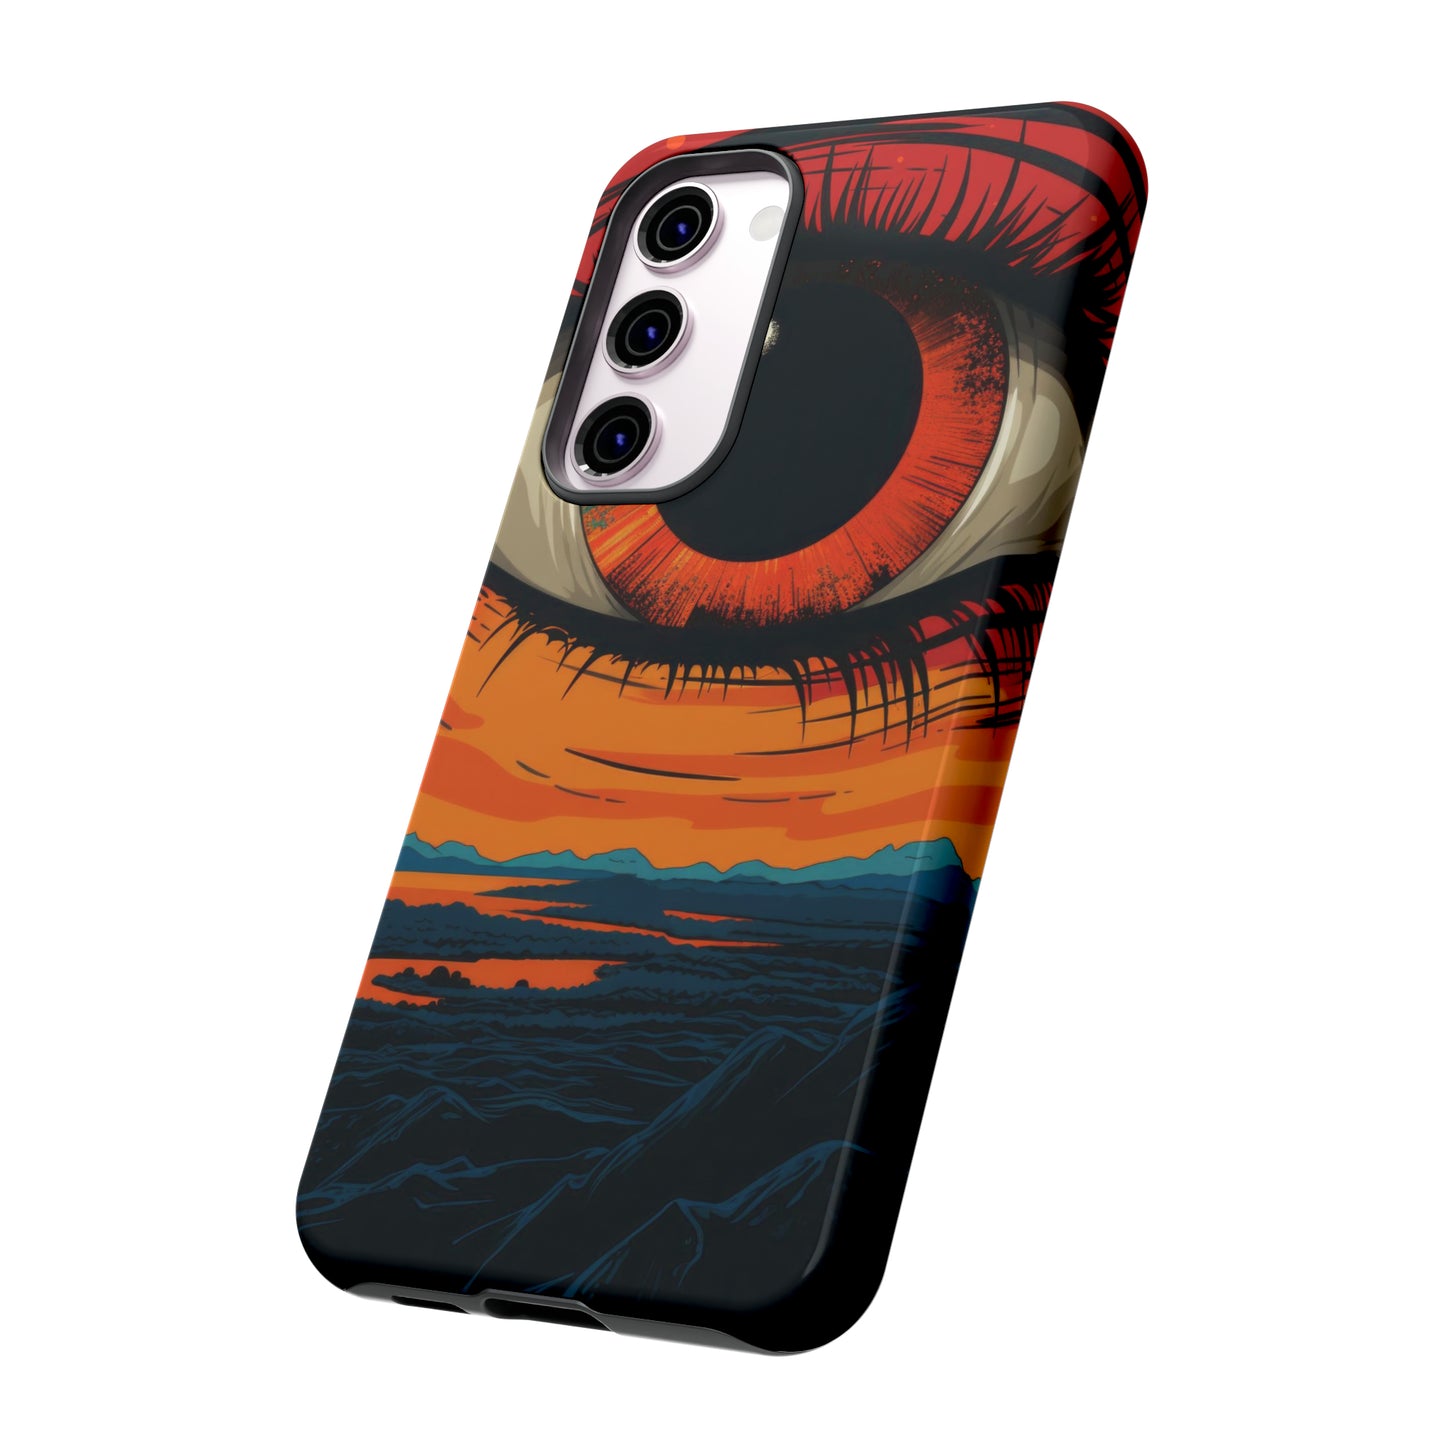 Sunset's Gaze: Burning Vision within an Eye Phone Case for iPhone, Samsung, Pixel